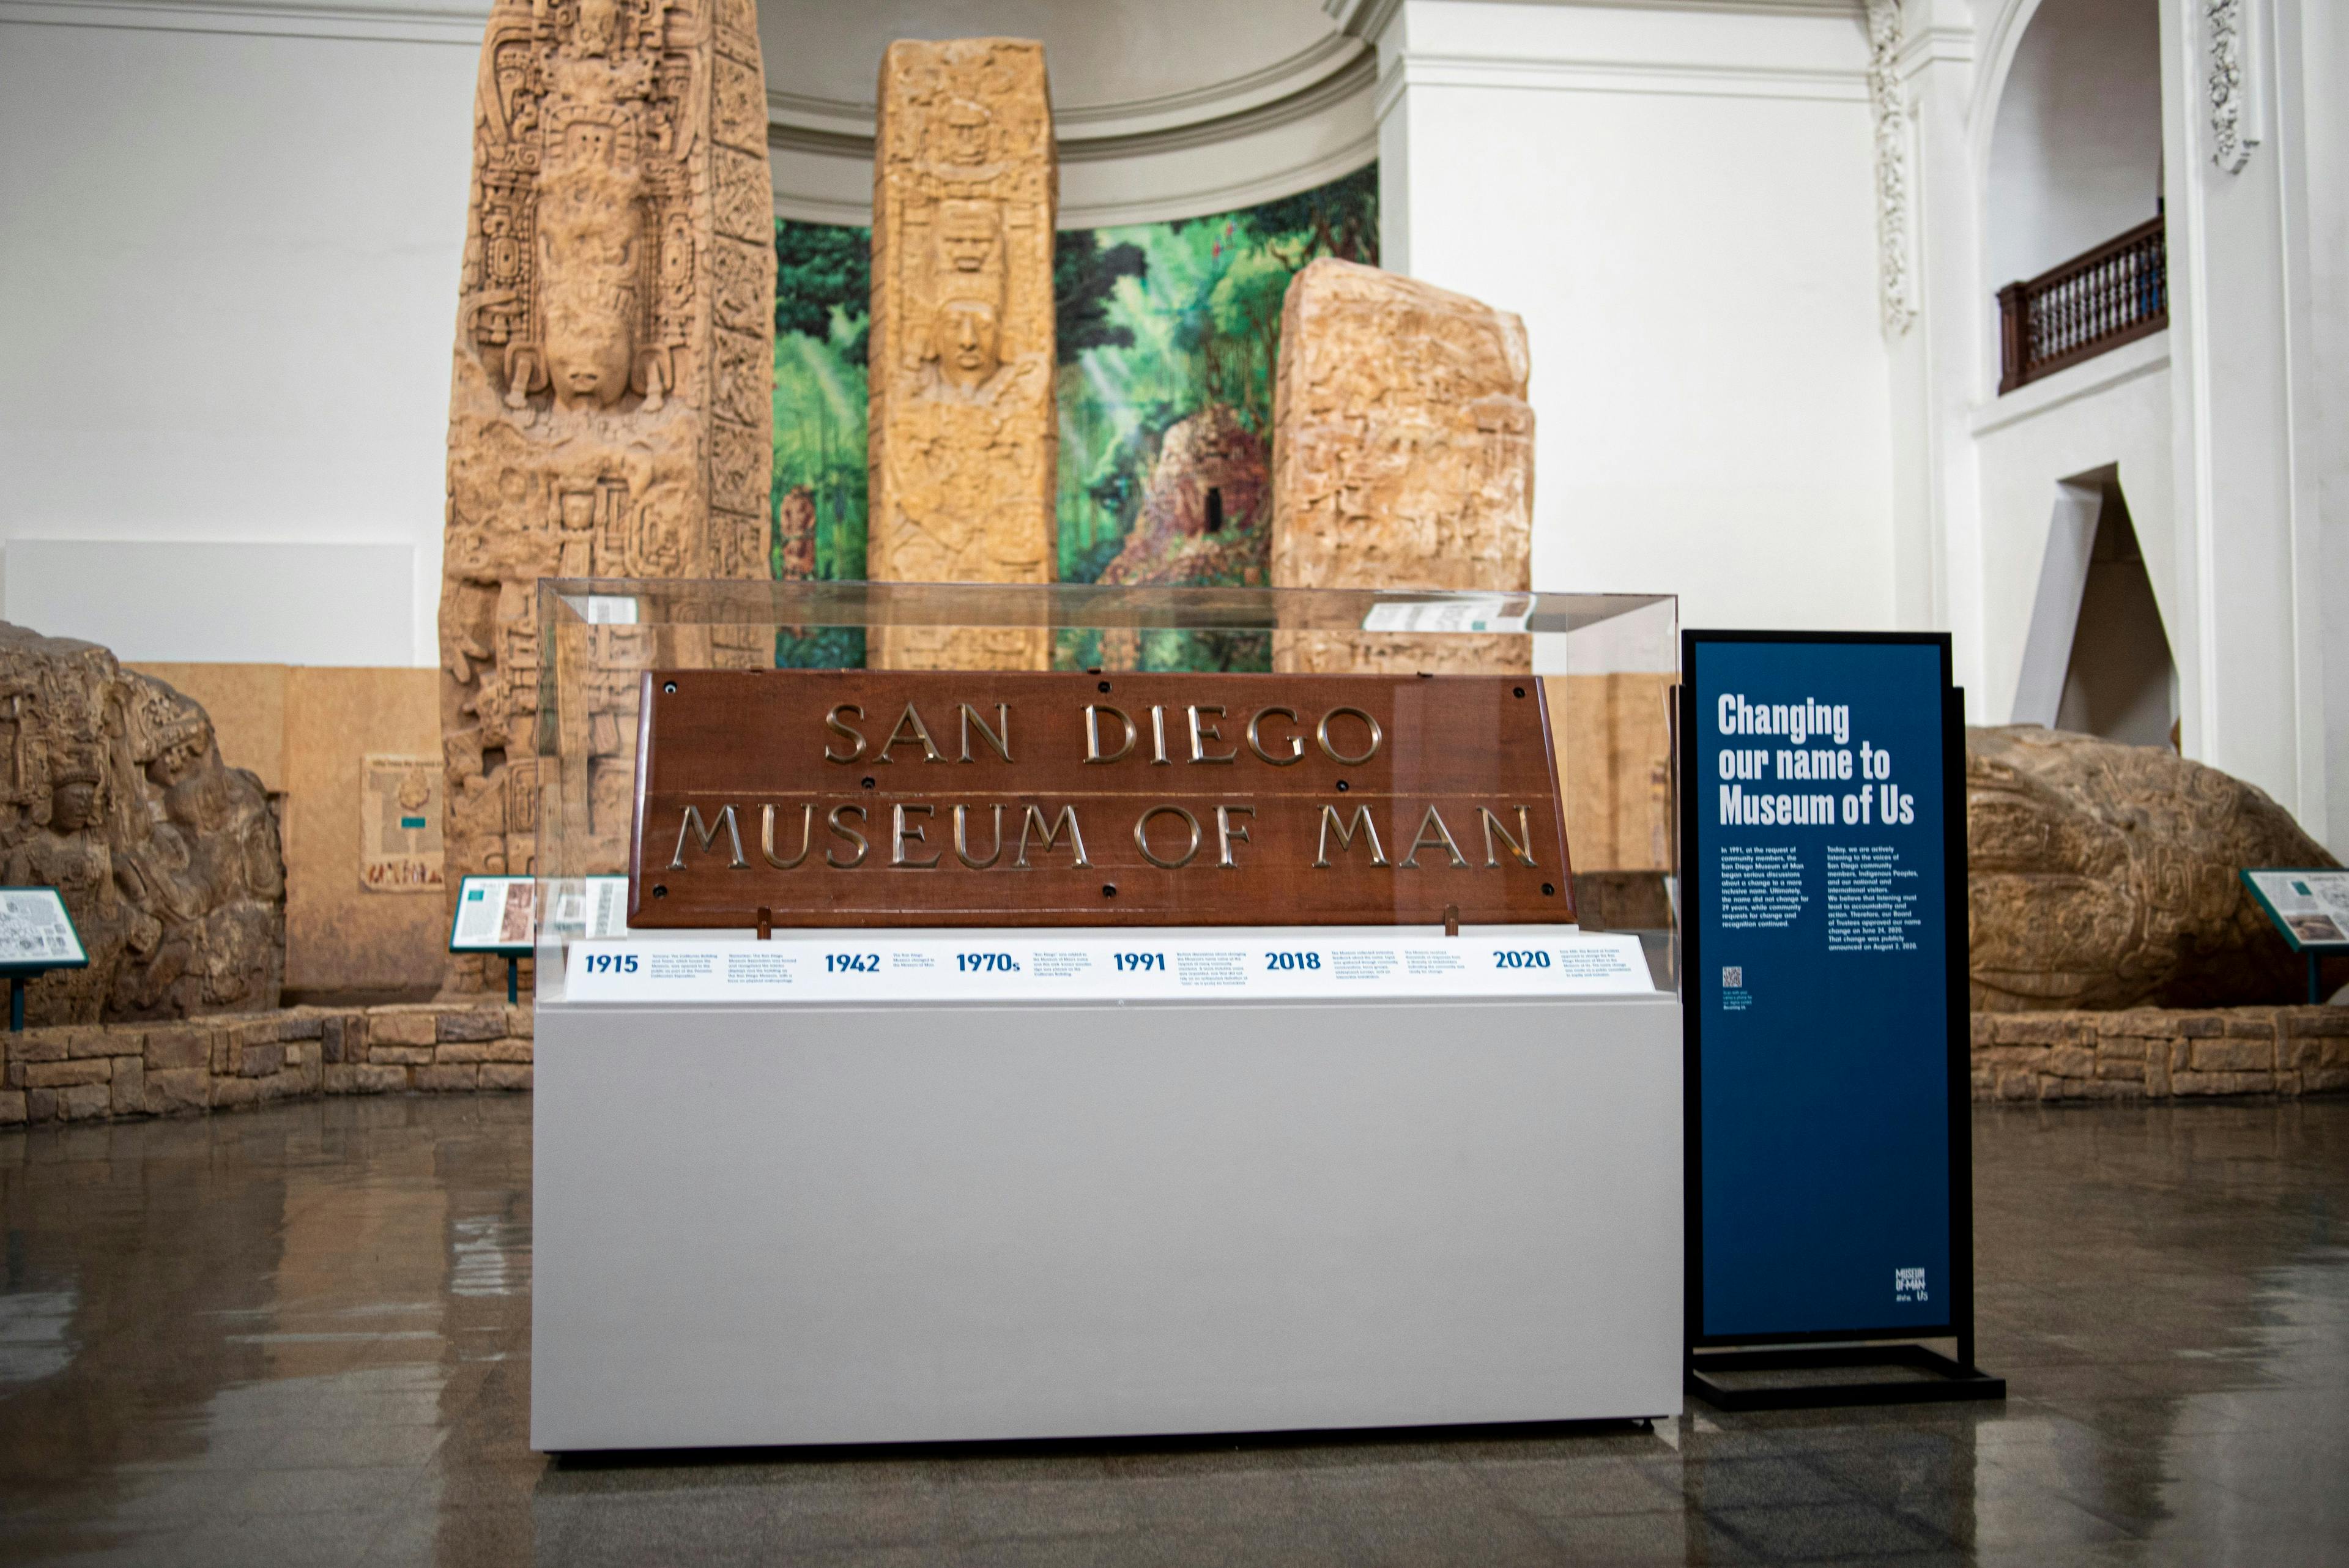 The wooden "San Diego Museum of Man" sign with brass letters sits within a plexiglass case. Underneath it, is a timeline with historic dates for the museum. To the right a blue standing sign reads, "Changing our name to Museum of Us." The whole installation stands before the Museum's "Maya Peoples: Heart of Sky, Heart of Earth" exhibit and three Maya stelae monuments.